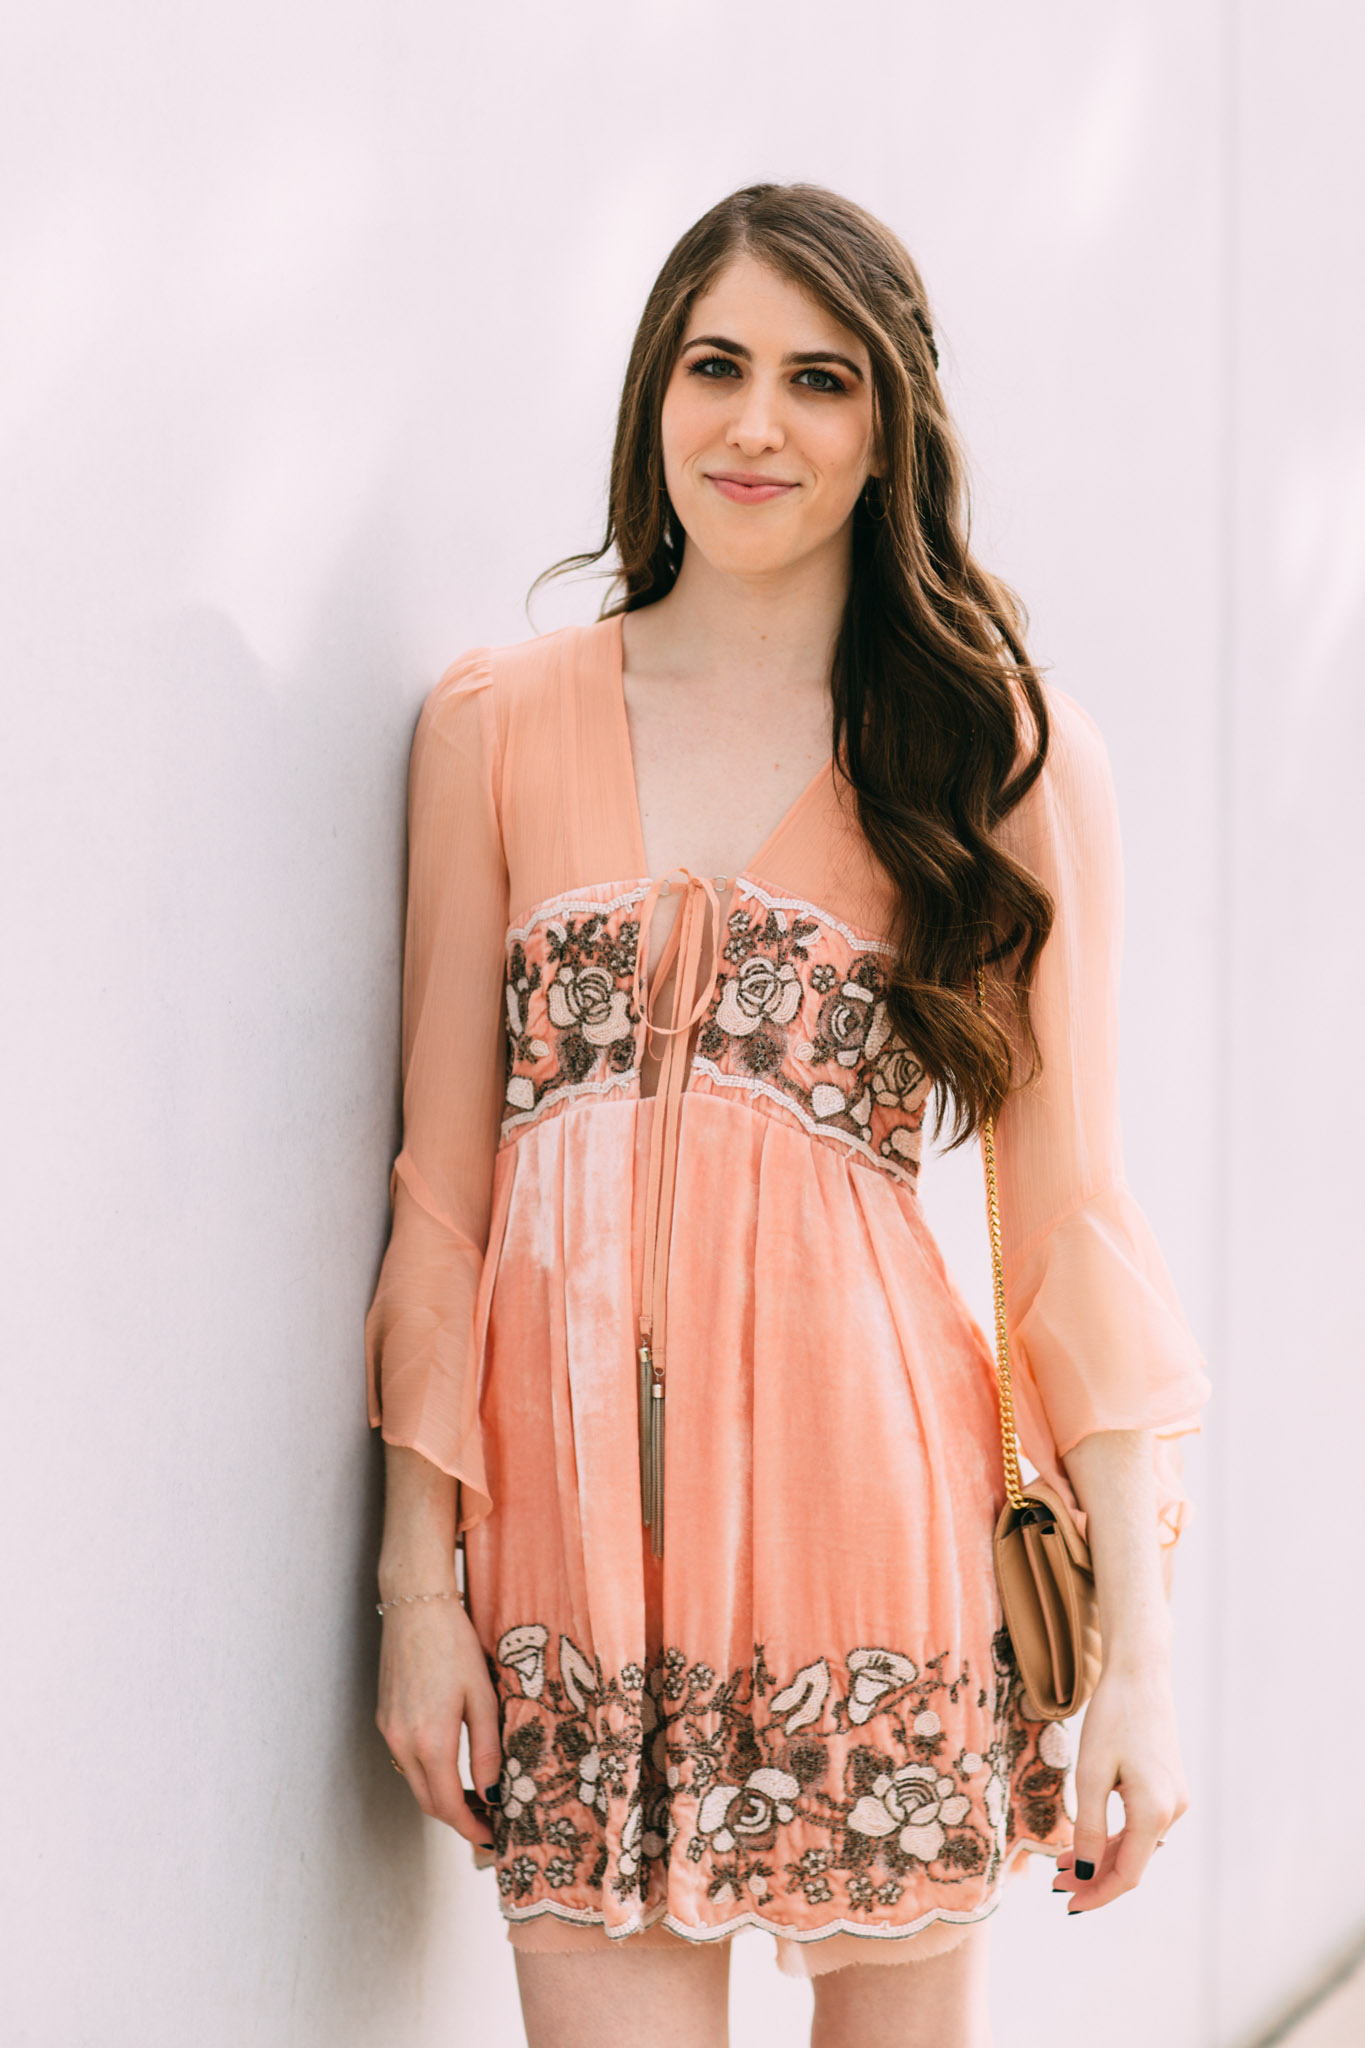 Free People Gemma's limited edition holiday dress rose